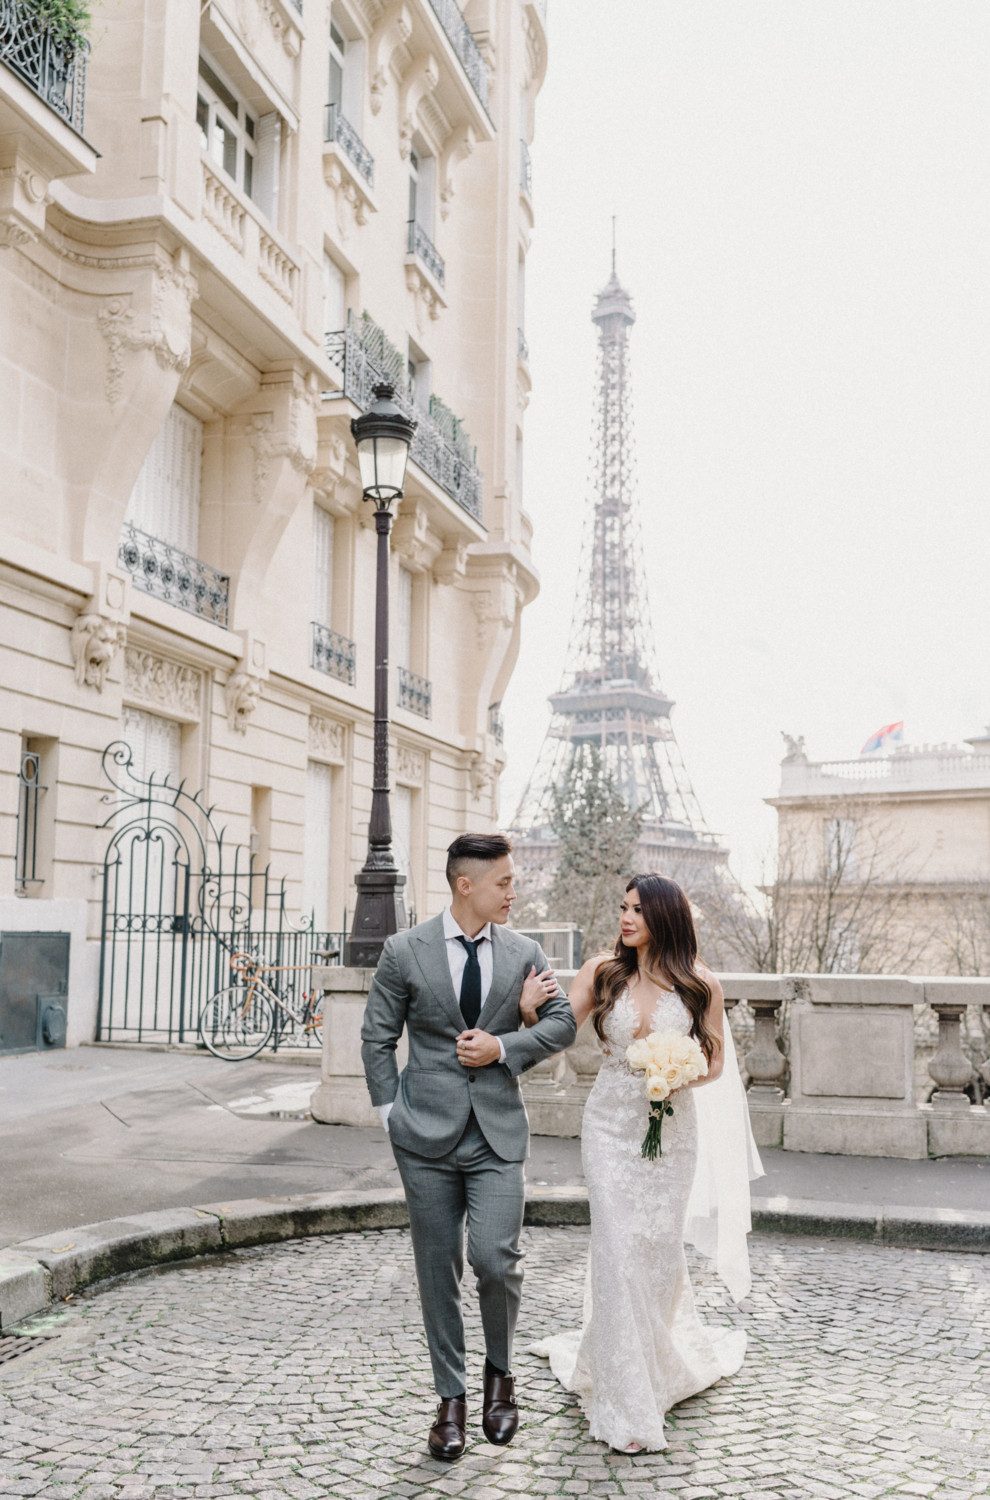 asian wedding couple walking arm in arm with view of eiffel tower